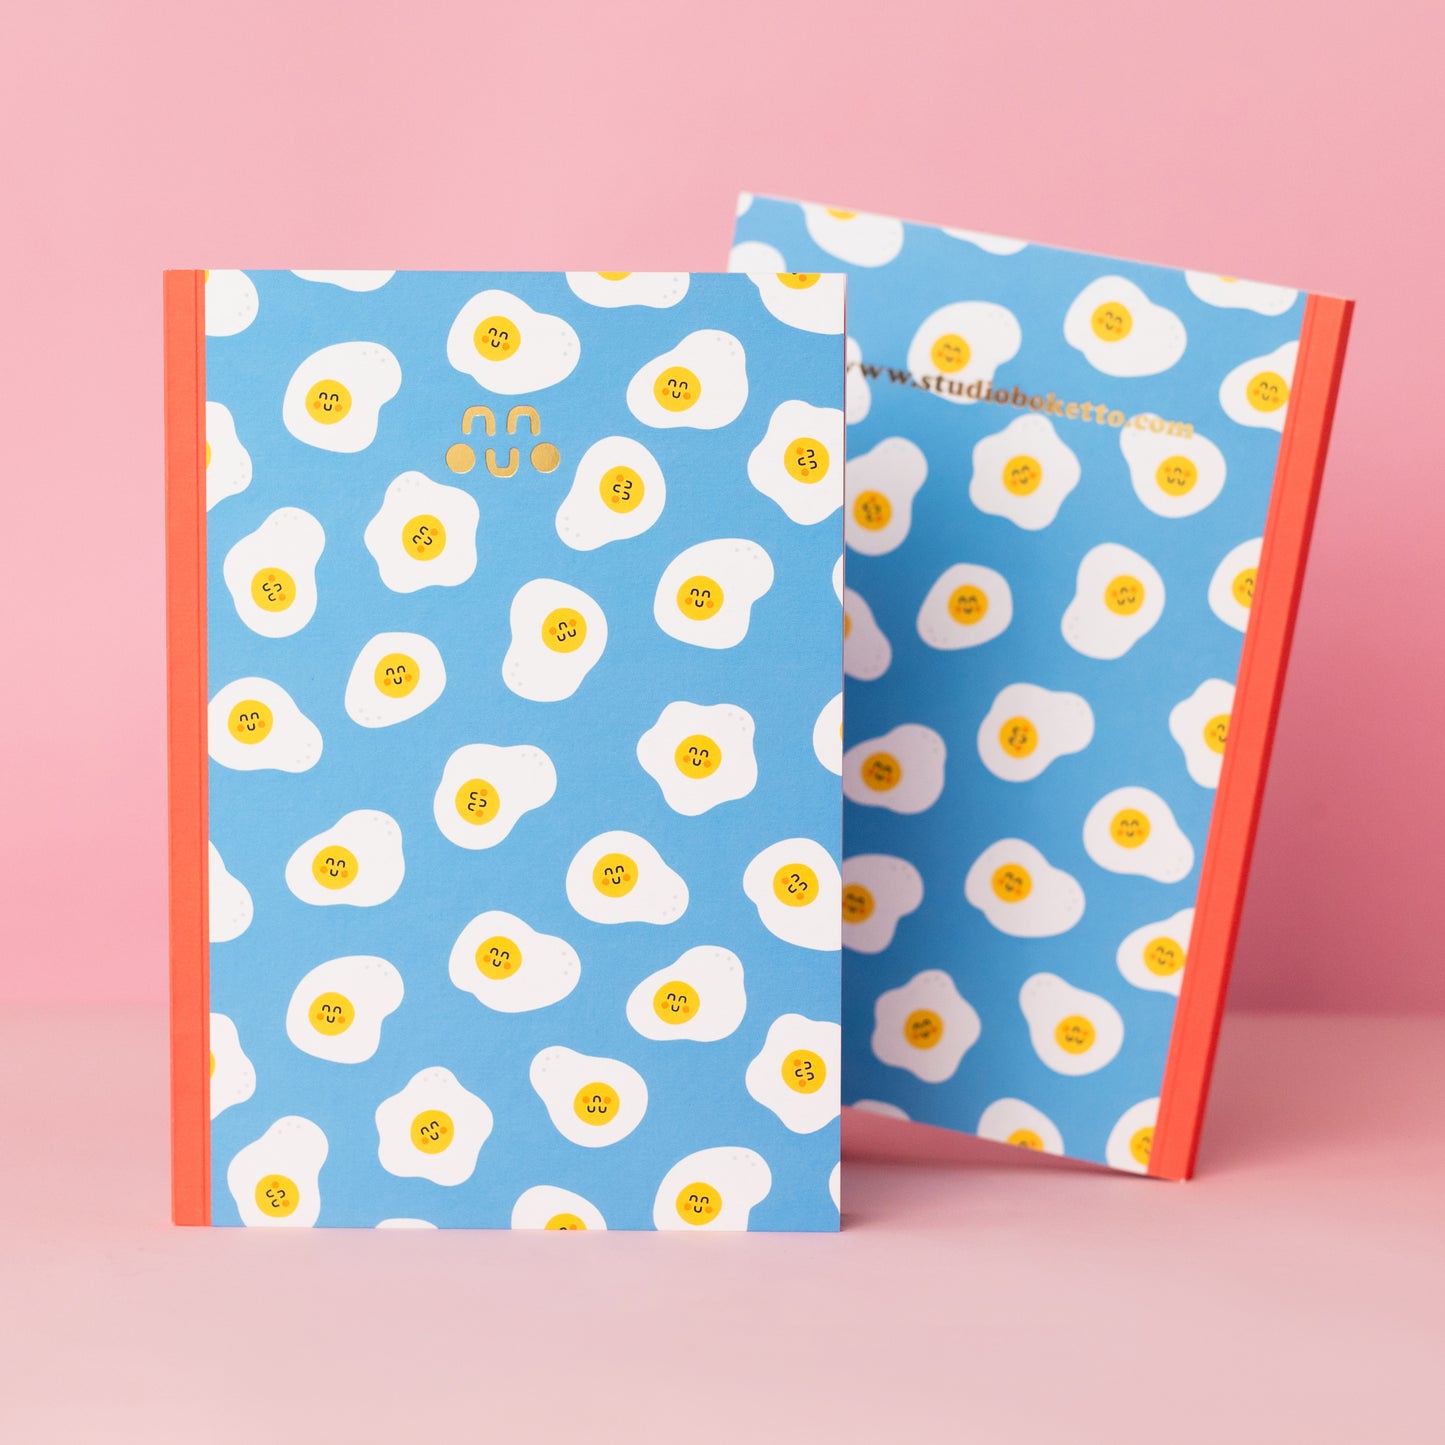 a5 notebook with egg pattern made by studio boketto